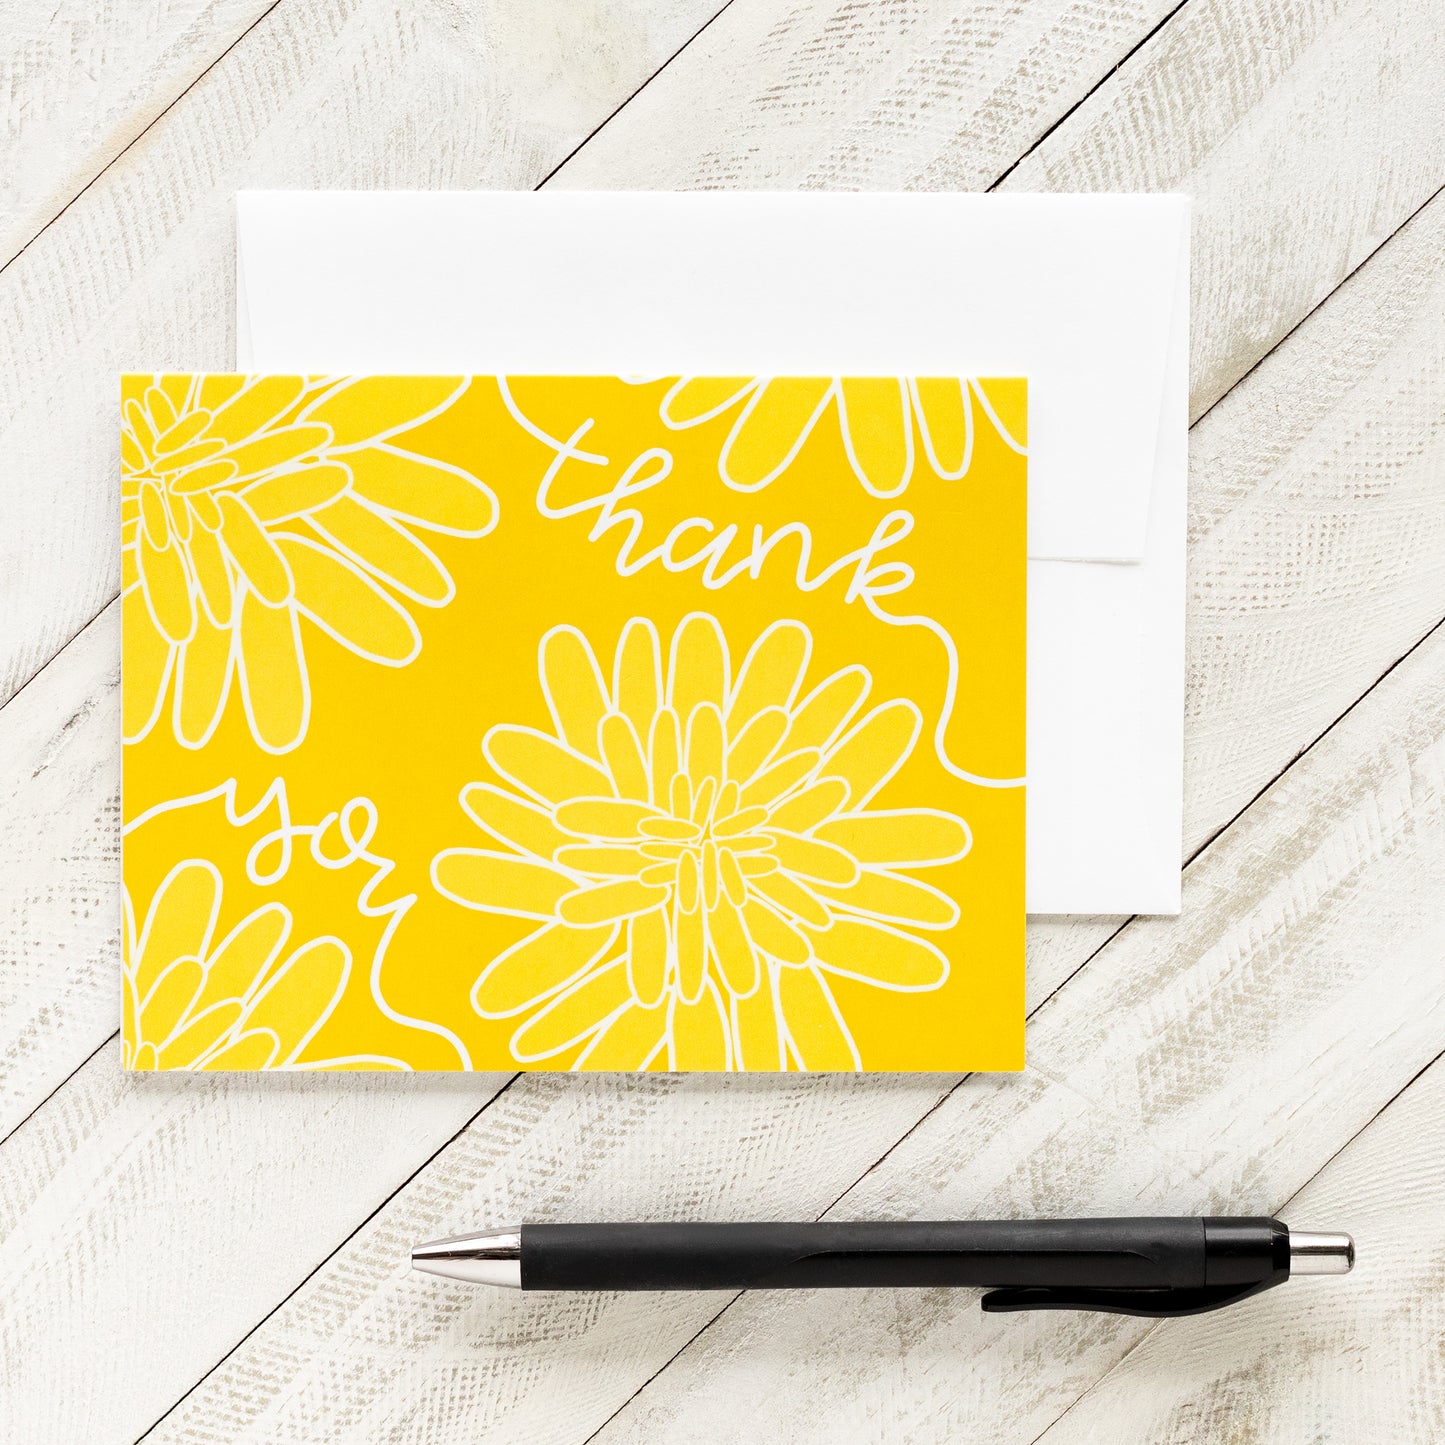 Vibrant yellow and white thank you note card with dandelion flowers